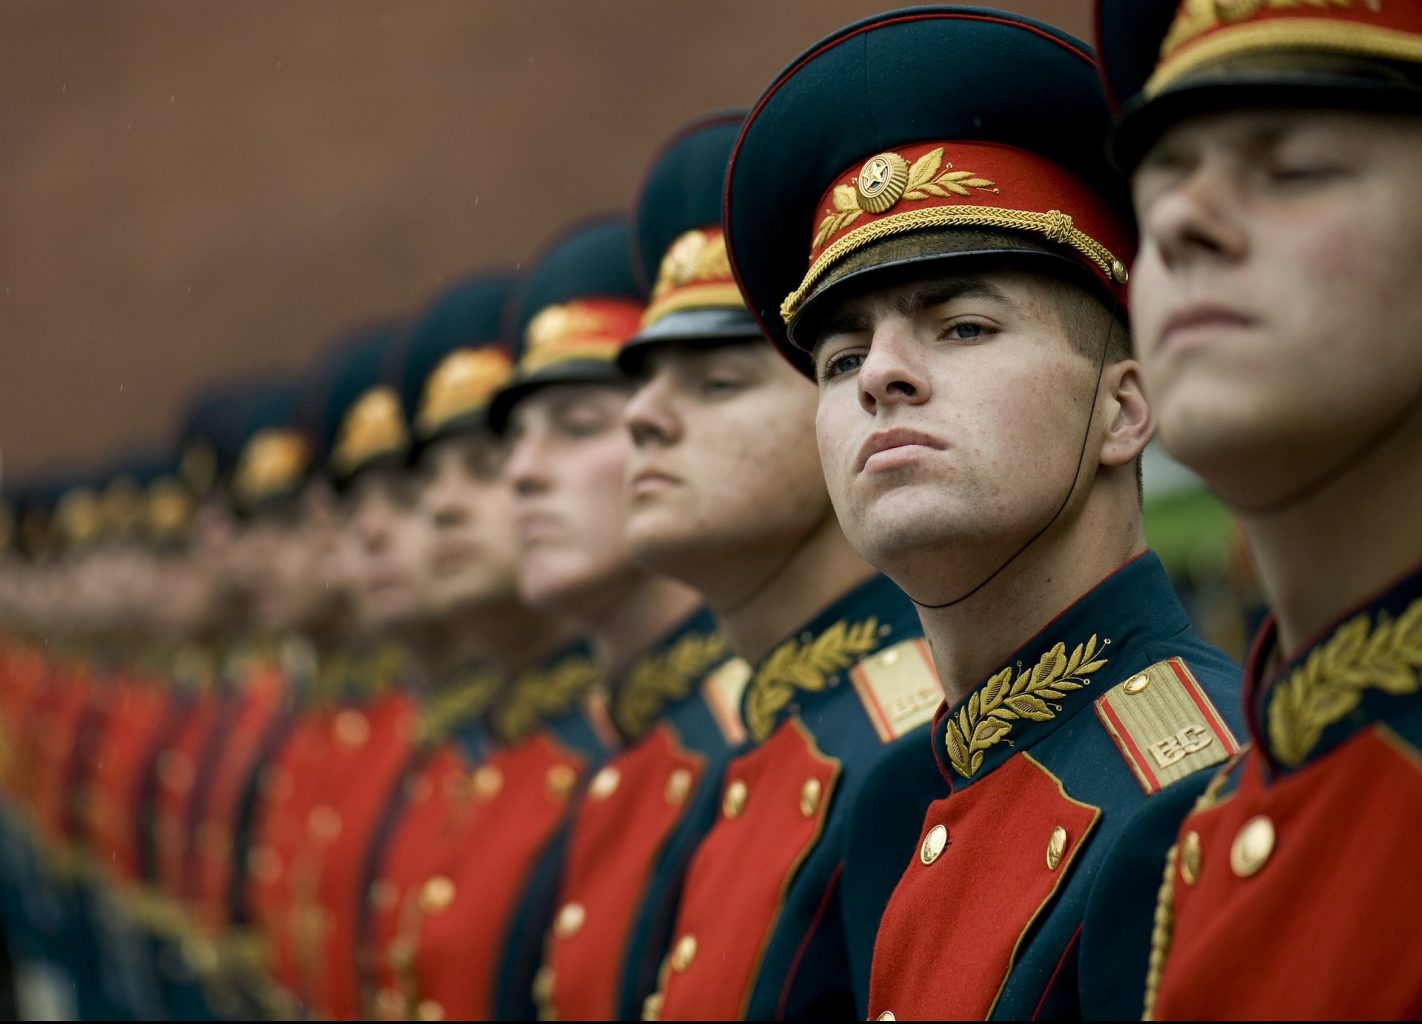 A Critique of Hybrid Warfare in the Light of Russia-Ukraine Crisis and Military Strategy